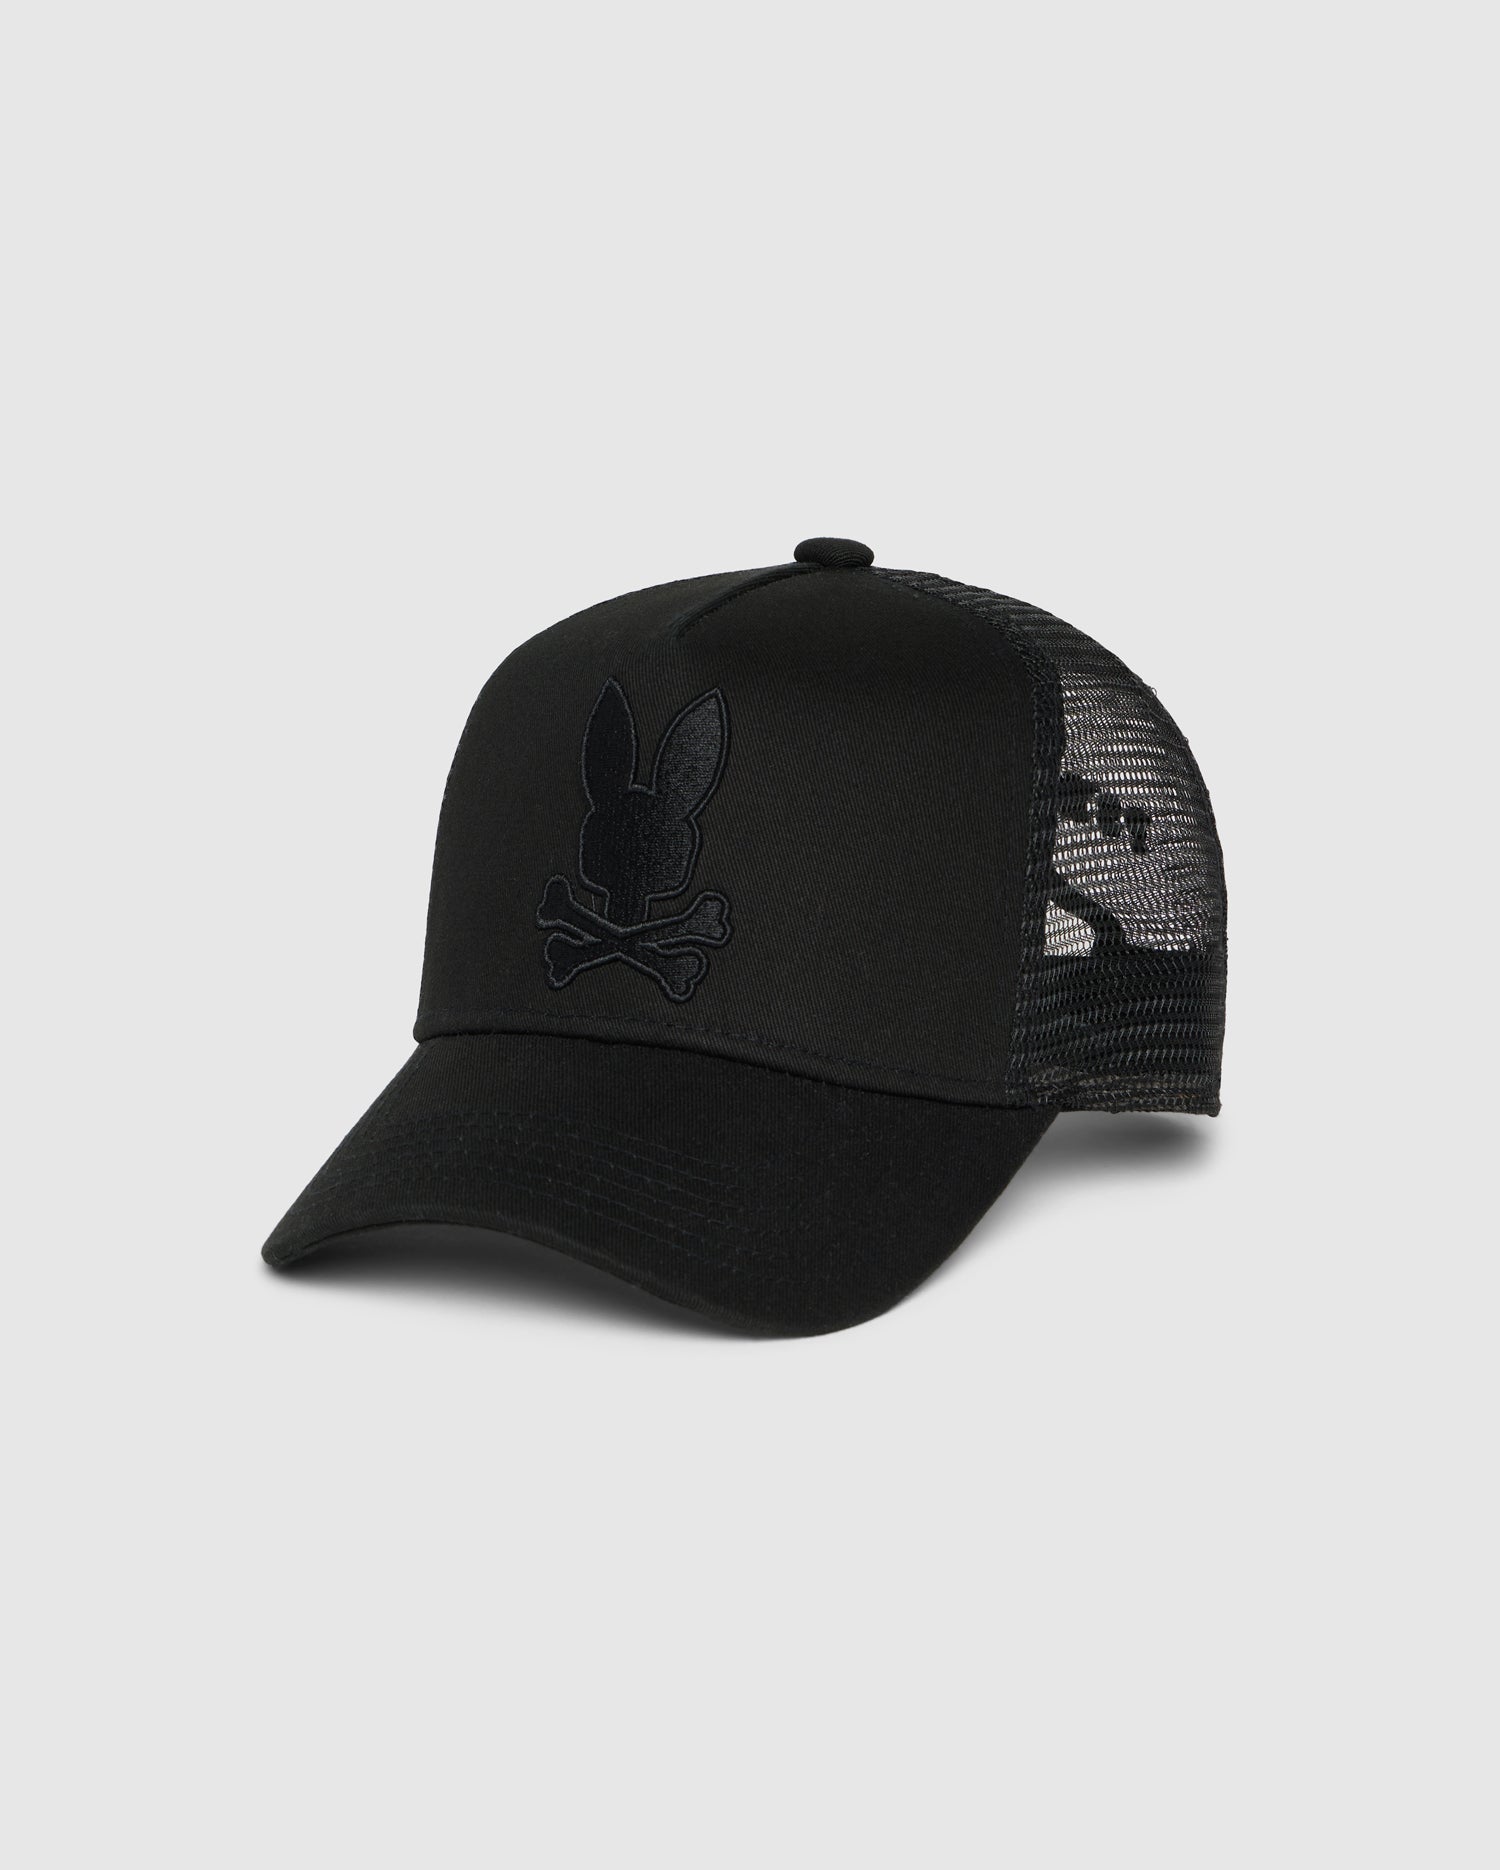 A black trucker hat with a mesh back and an emblem featuring a rabbit skull and crossbones design on the front, complete with snapback fastening for the perfect fit, is the KIDS HOUSTON TRUCKER HAT - B0A550C2HT by Psycho Bunny.